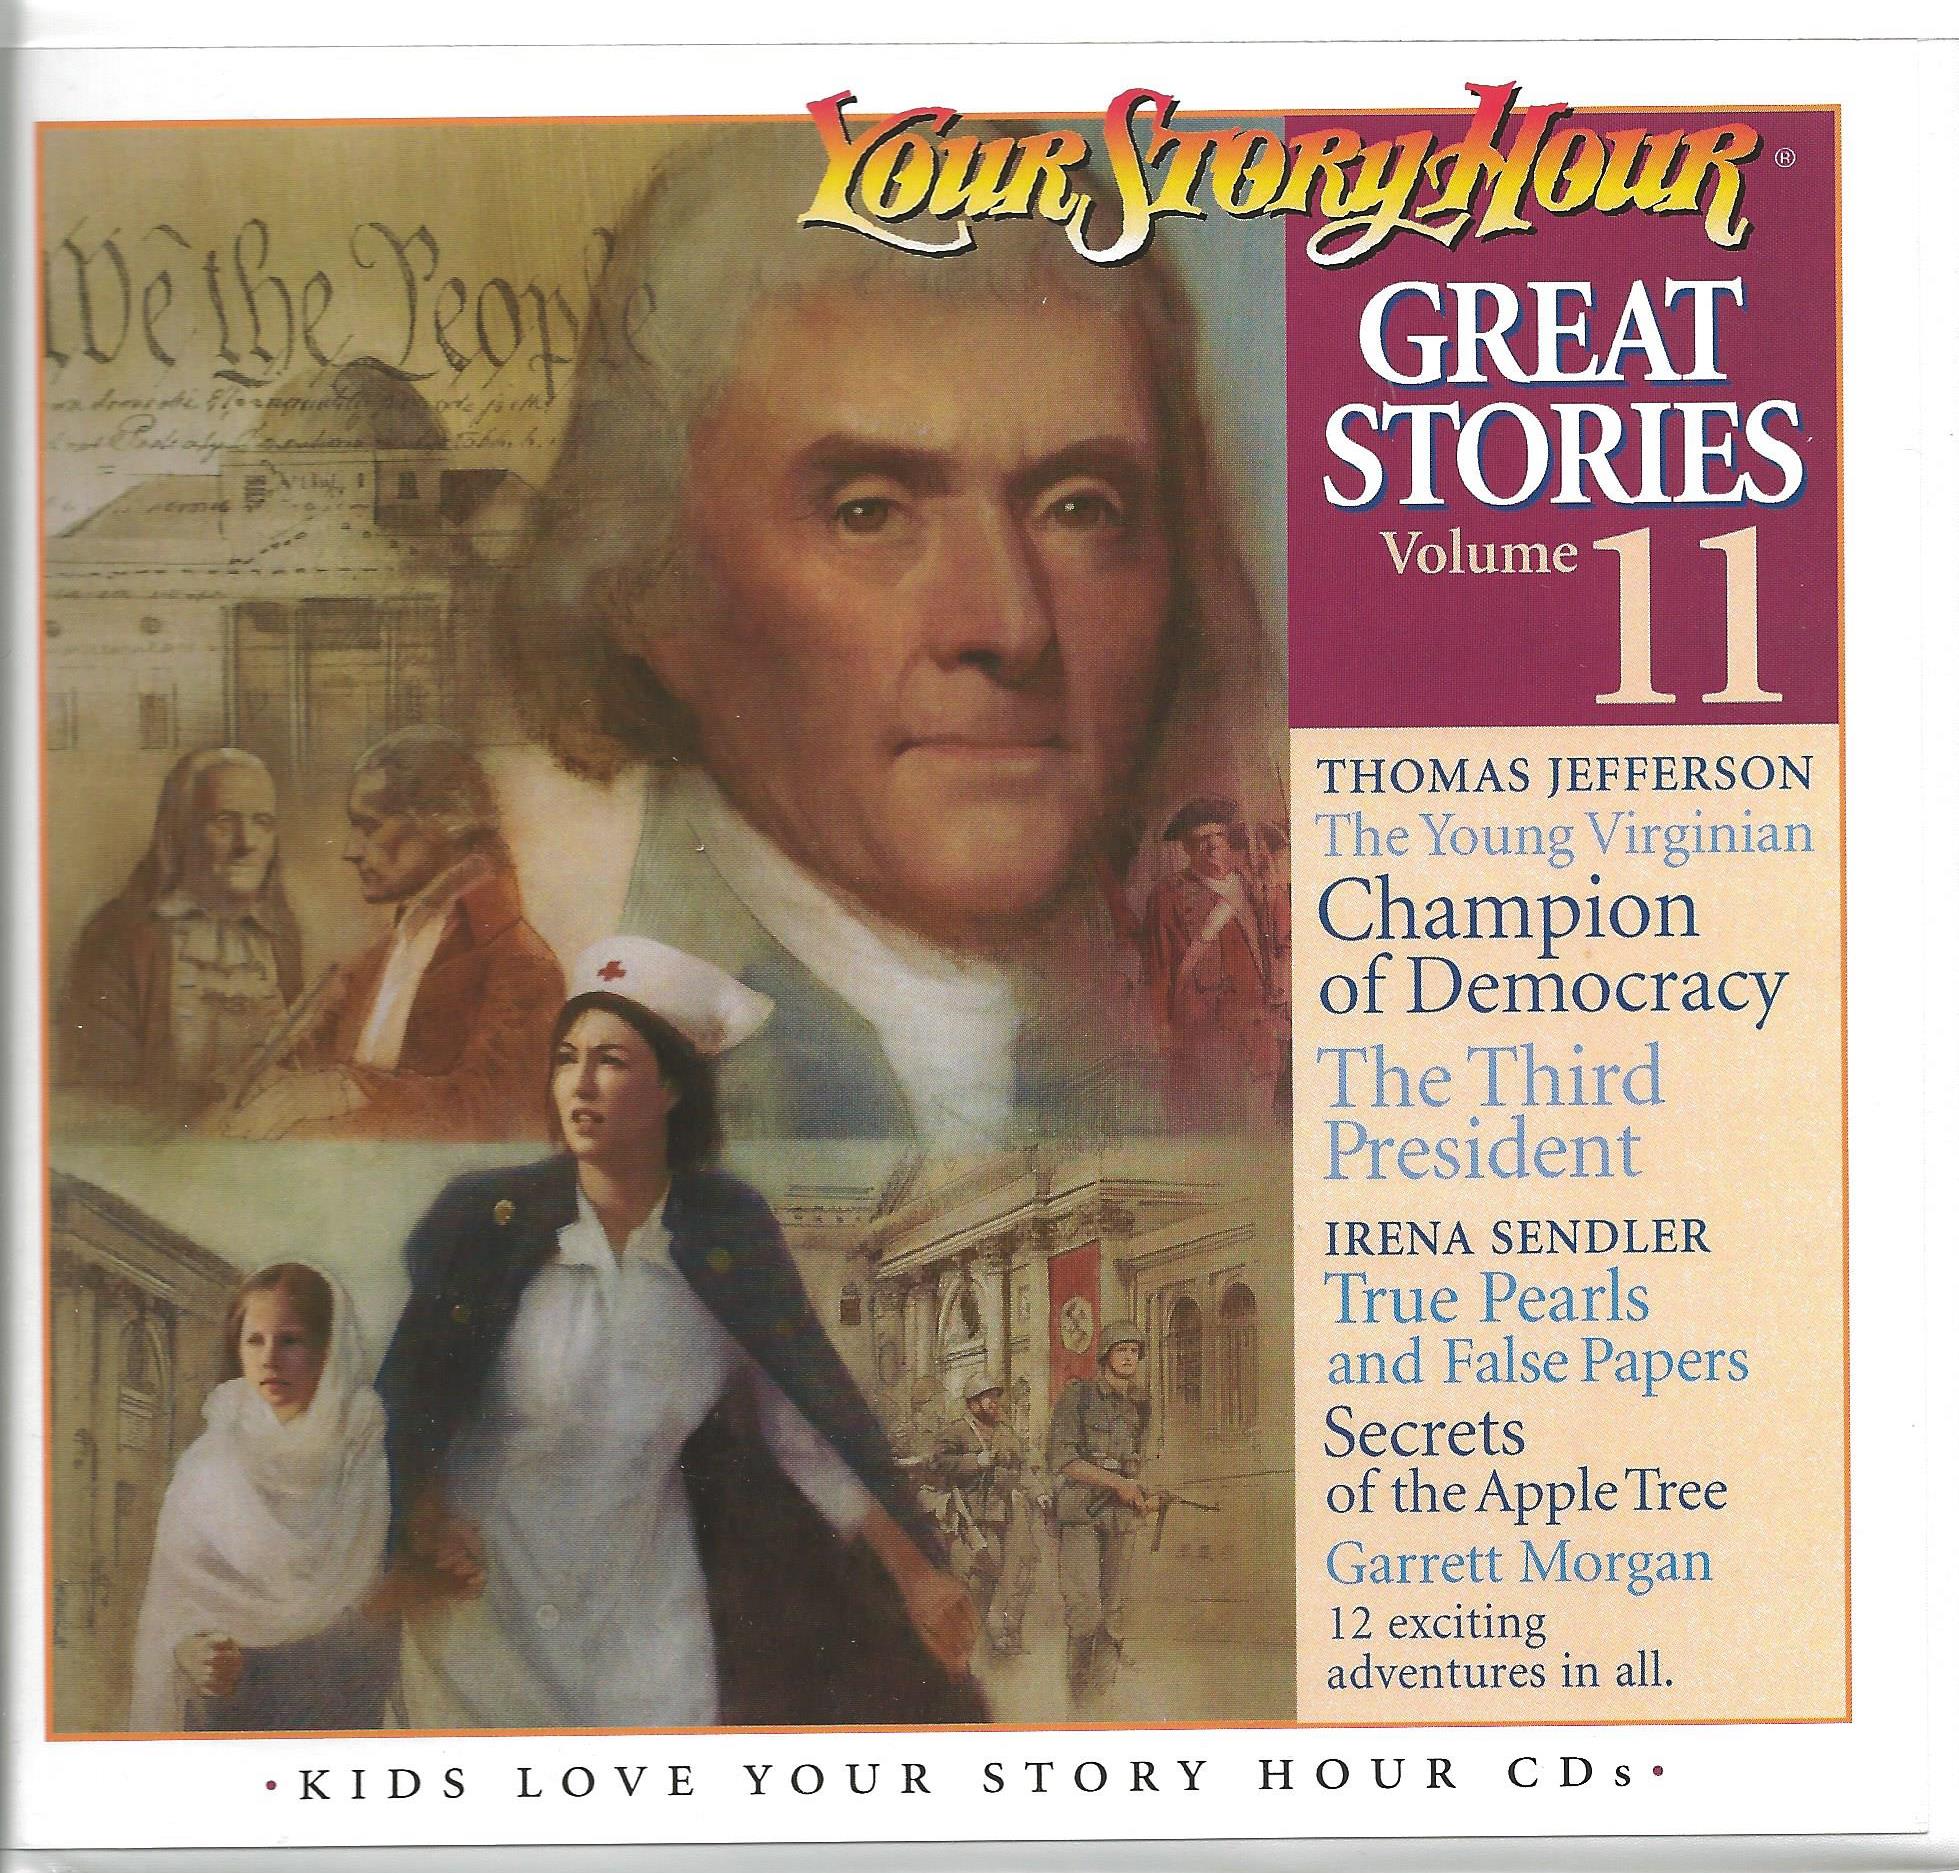 GREAT STORIES VOLUME 11 CD ALBUM Your Story Hour